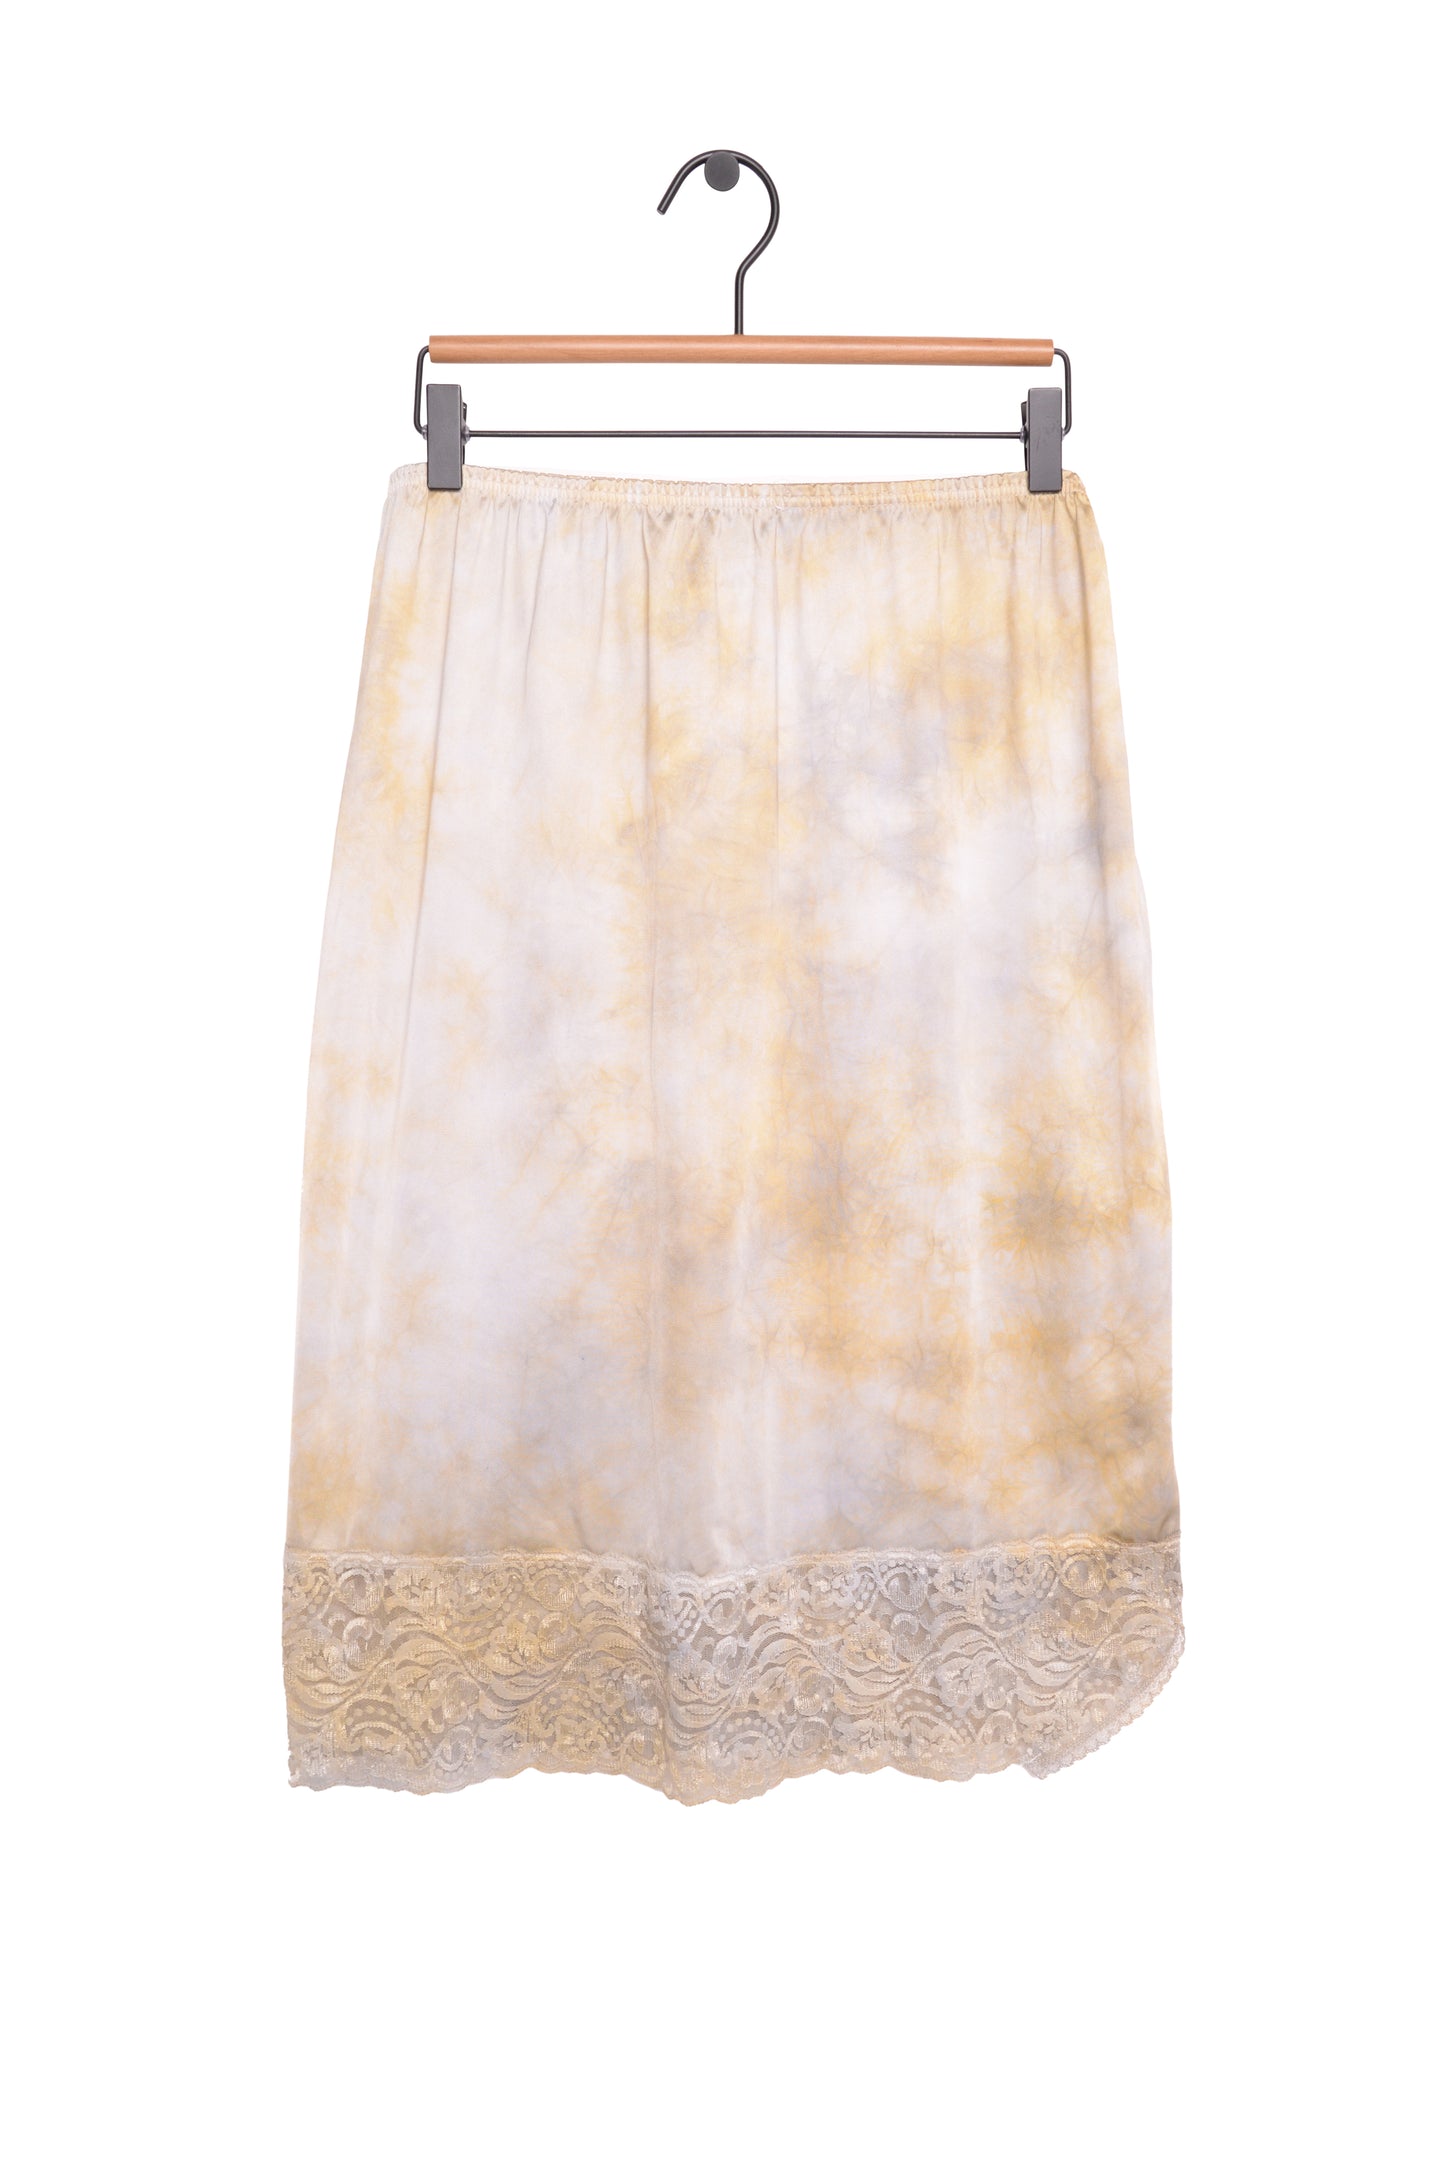 1950s Hand-Dyed Lace Slip Skirt USA